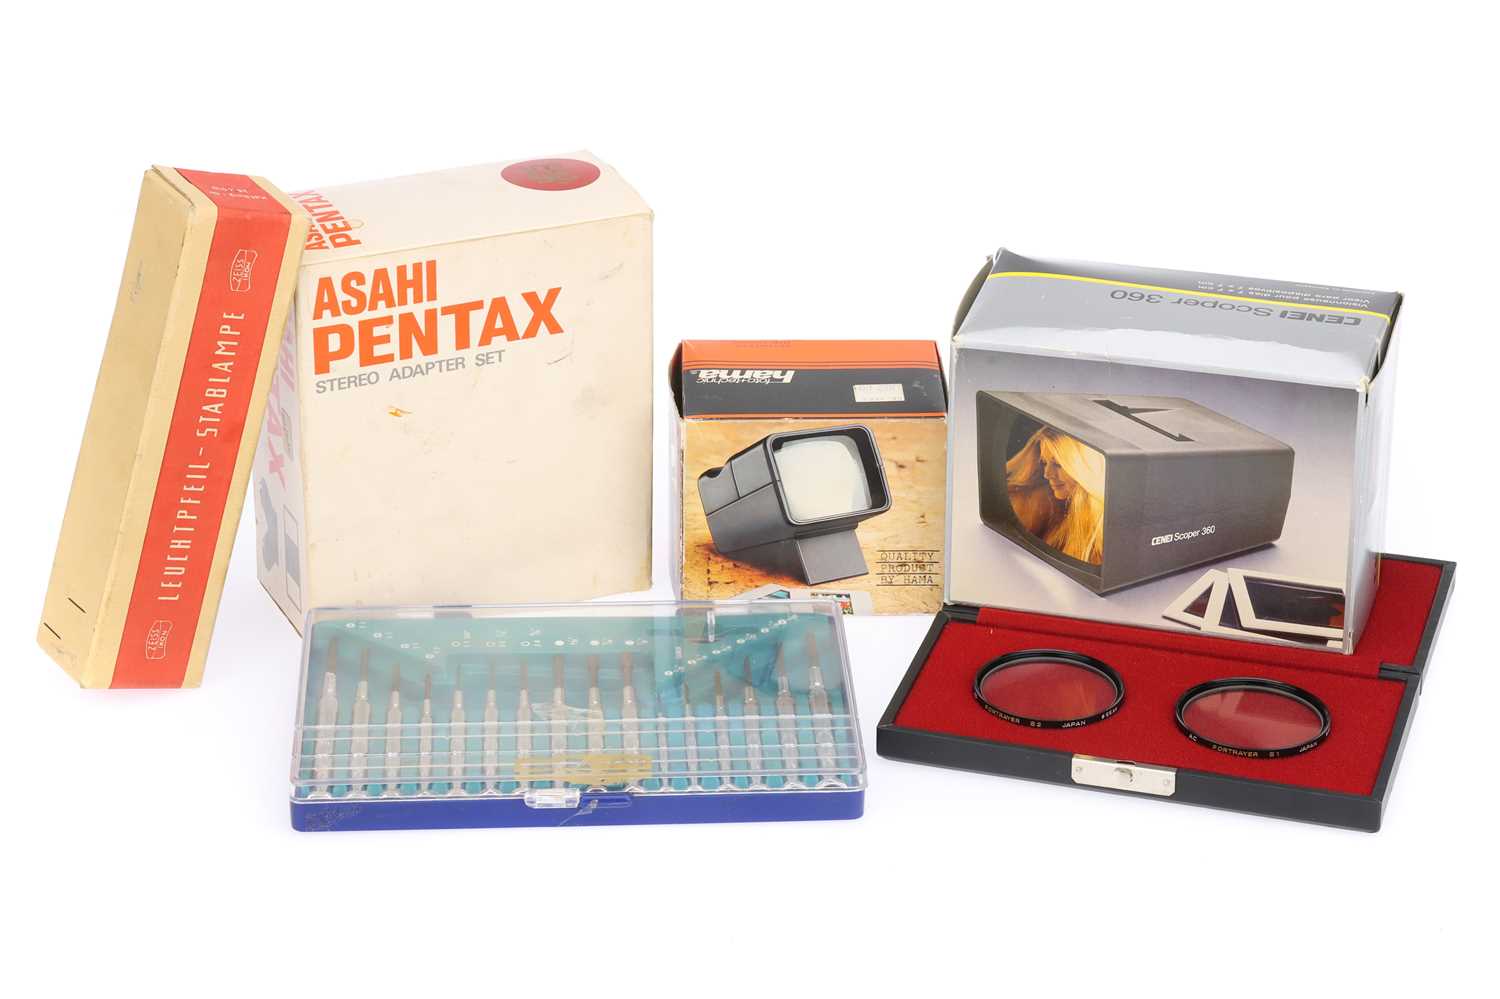 Lot 643 - An Asahi Pentax Stereo Adapter and Other Accessories